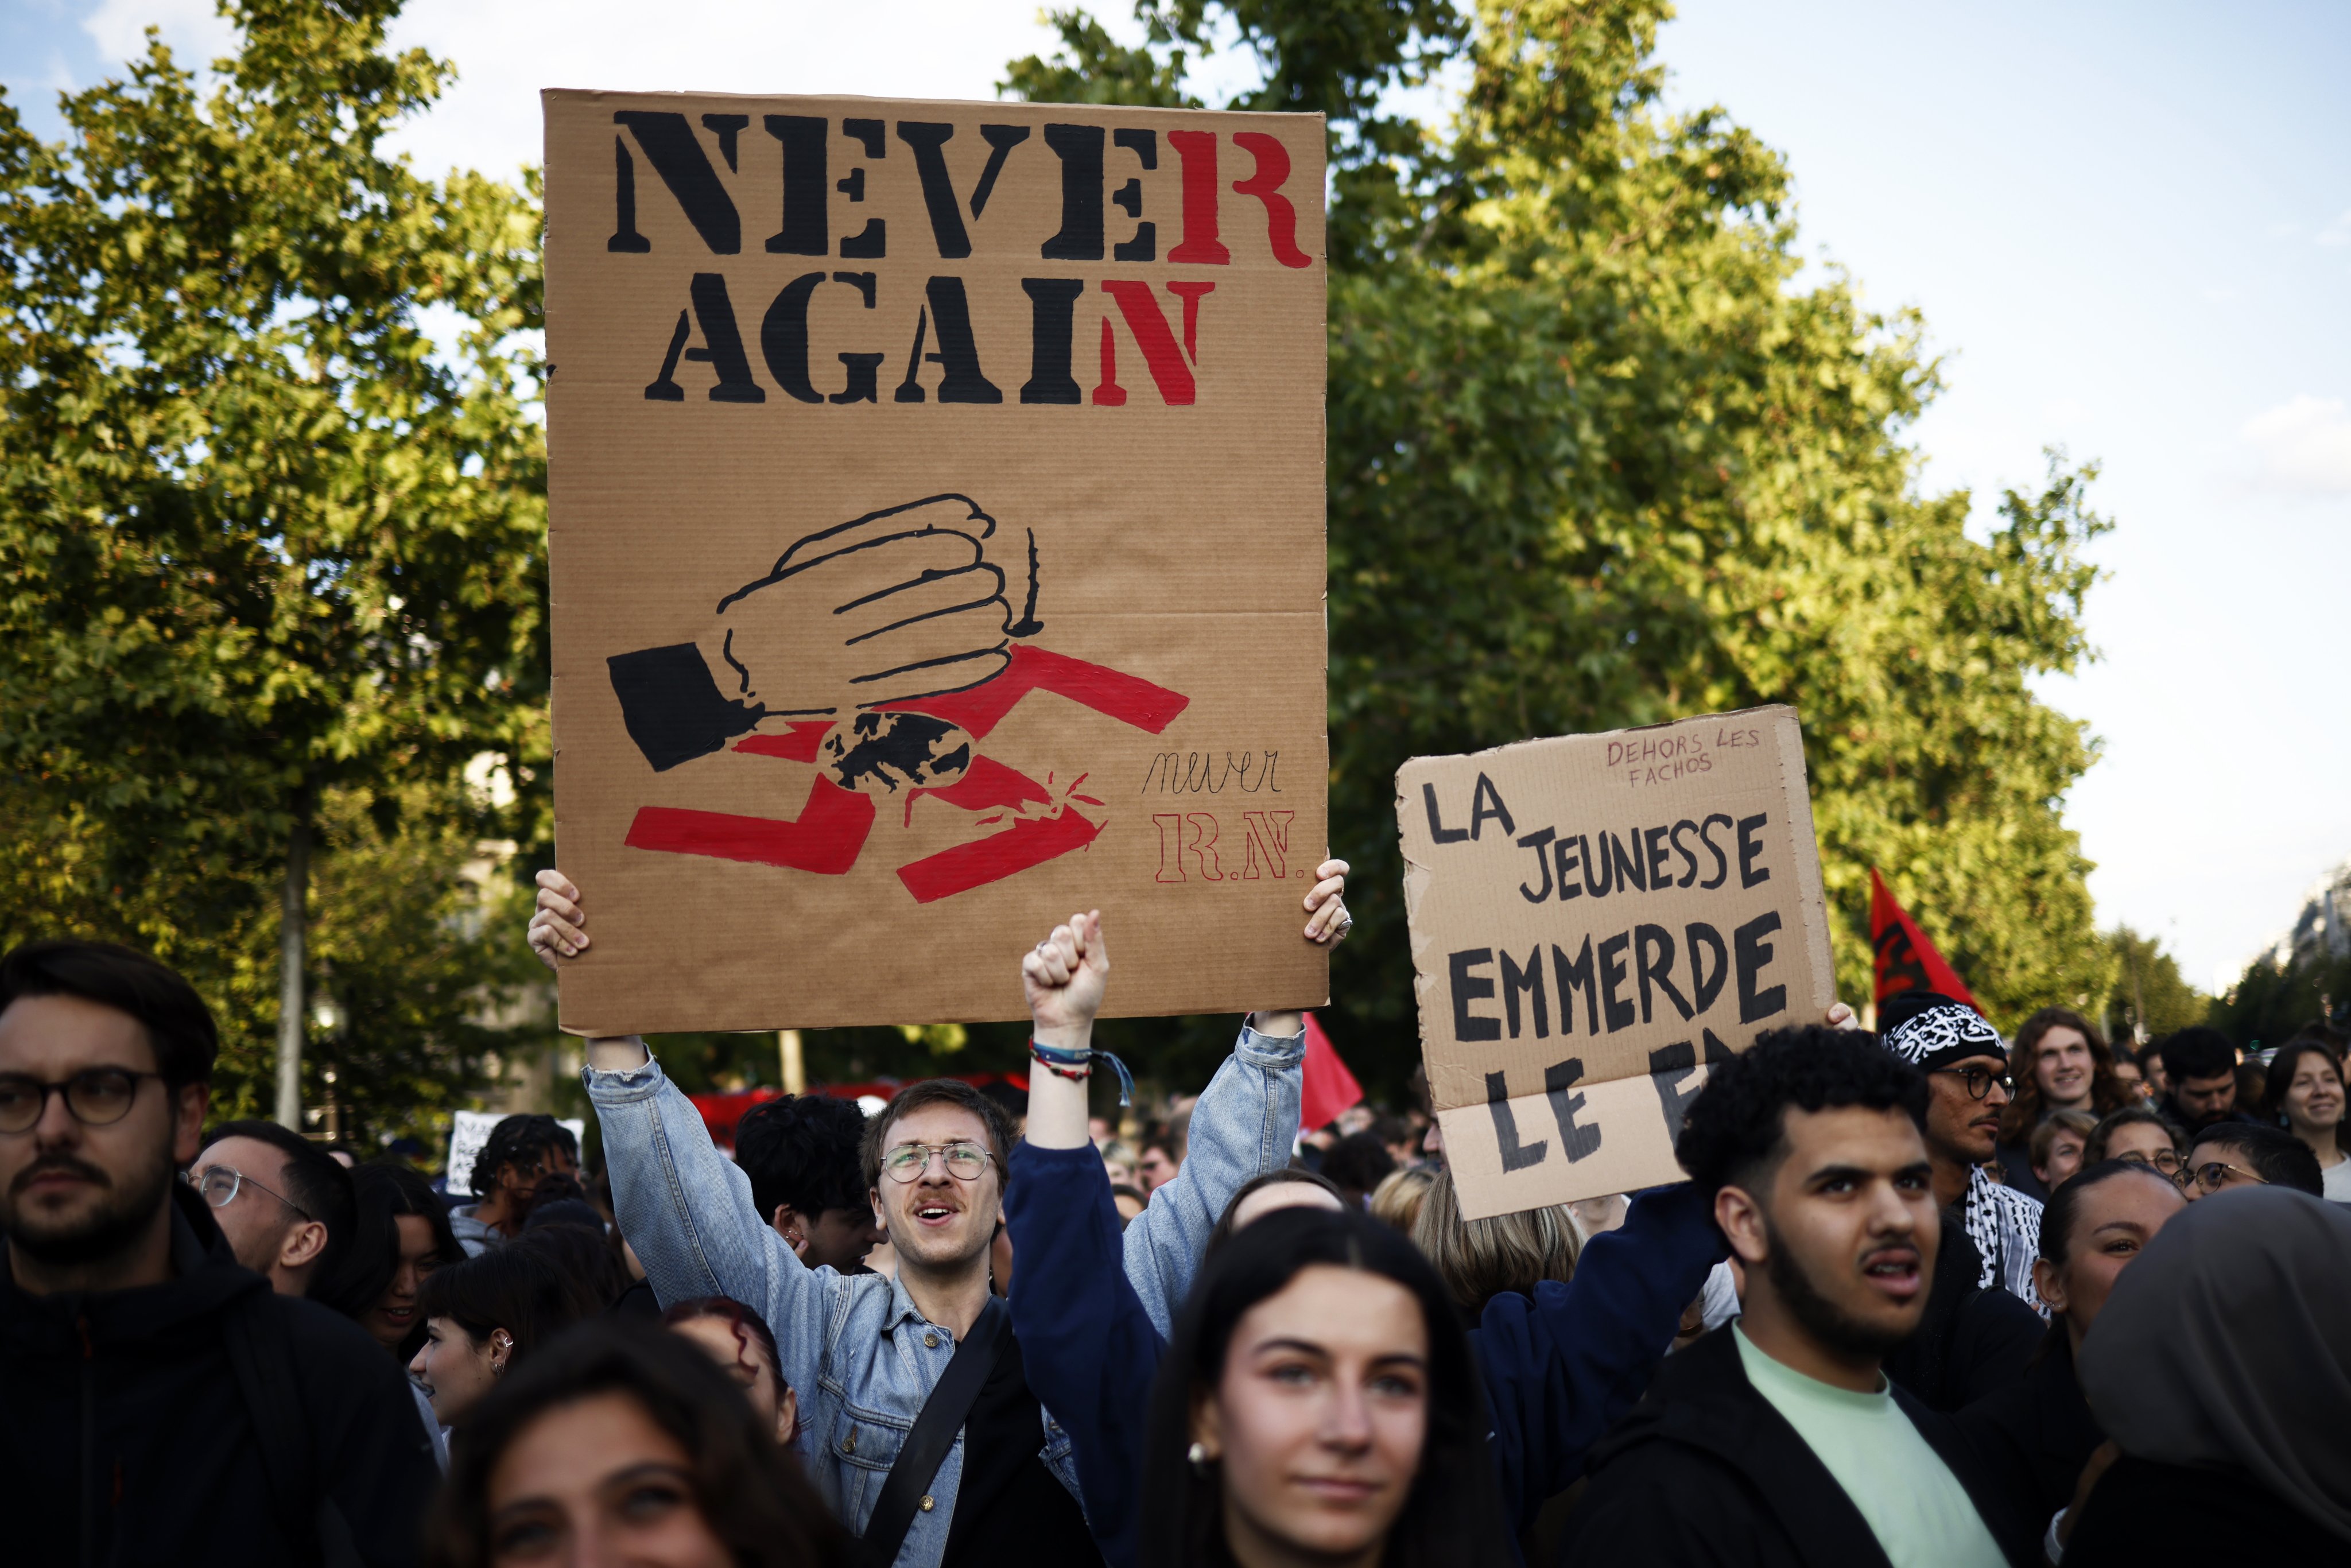 Protesters in Paris demonstrate against French far right-wing party National Rally in June. Photo: EPA-EFE